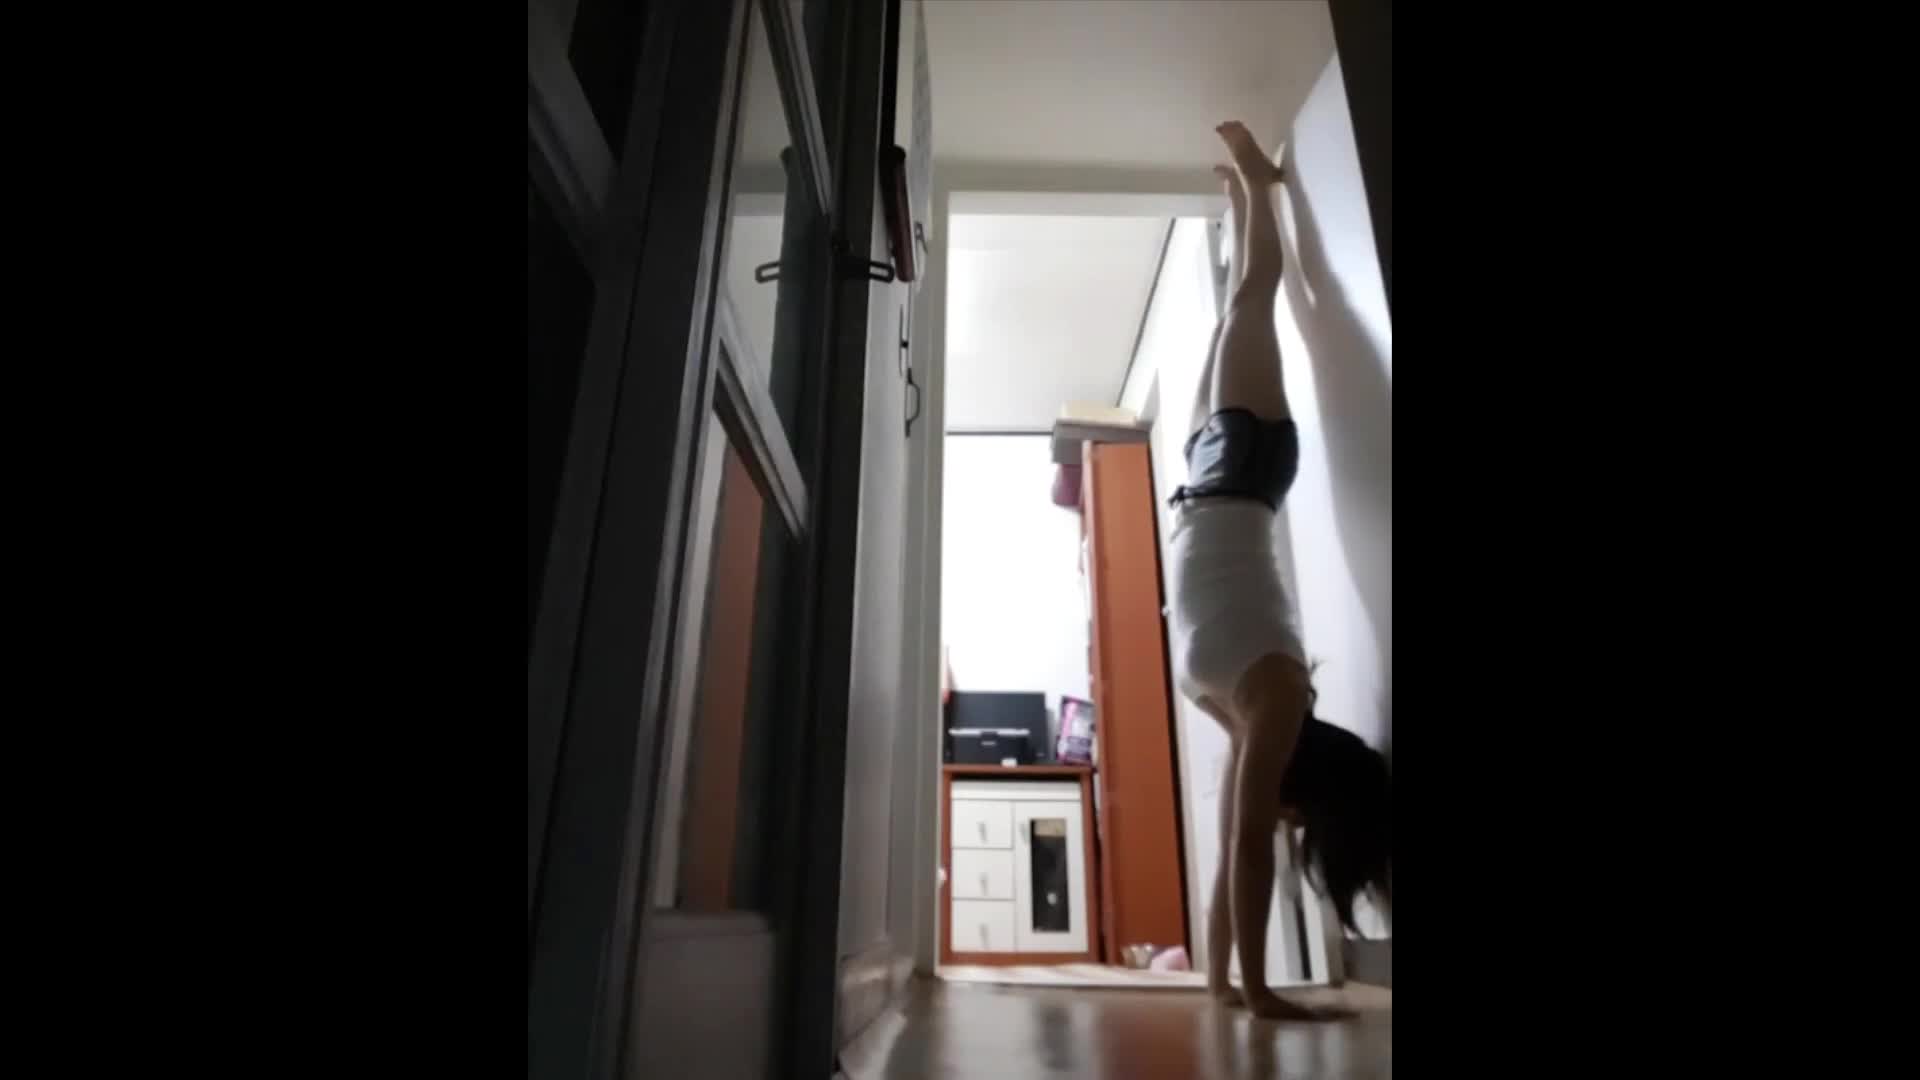 Use the door to help with yoga for balance.